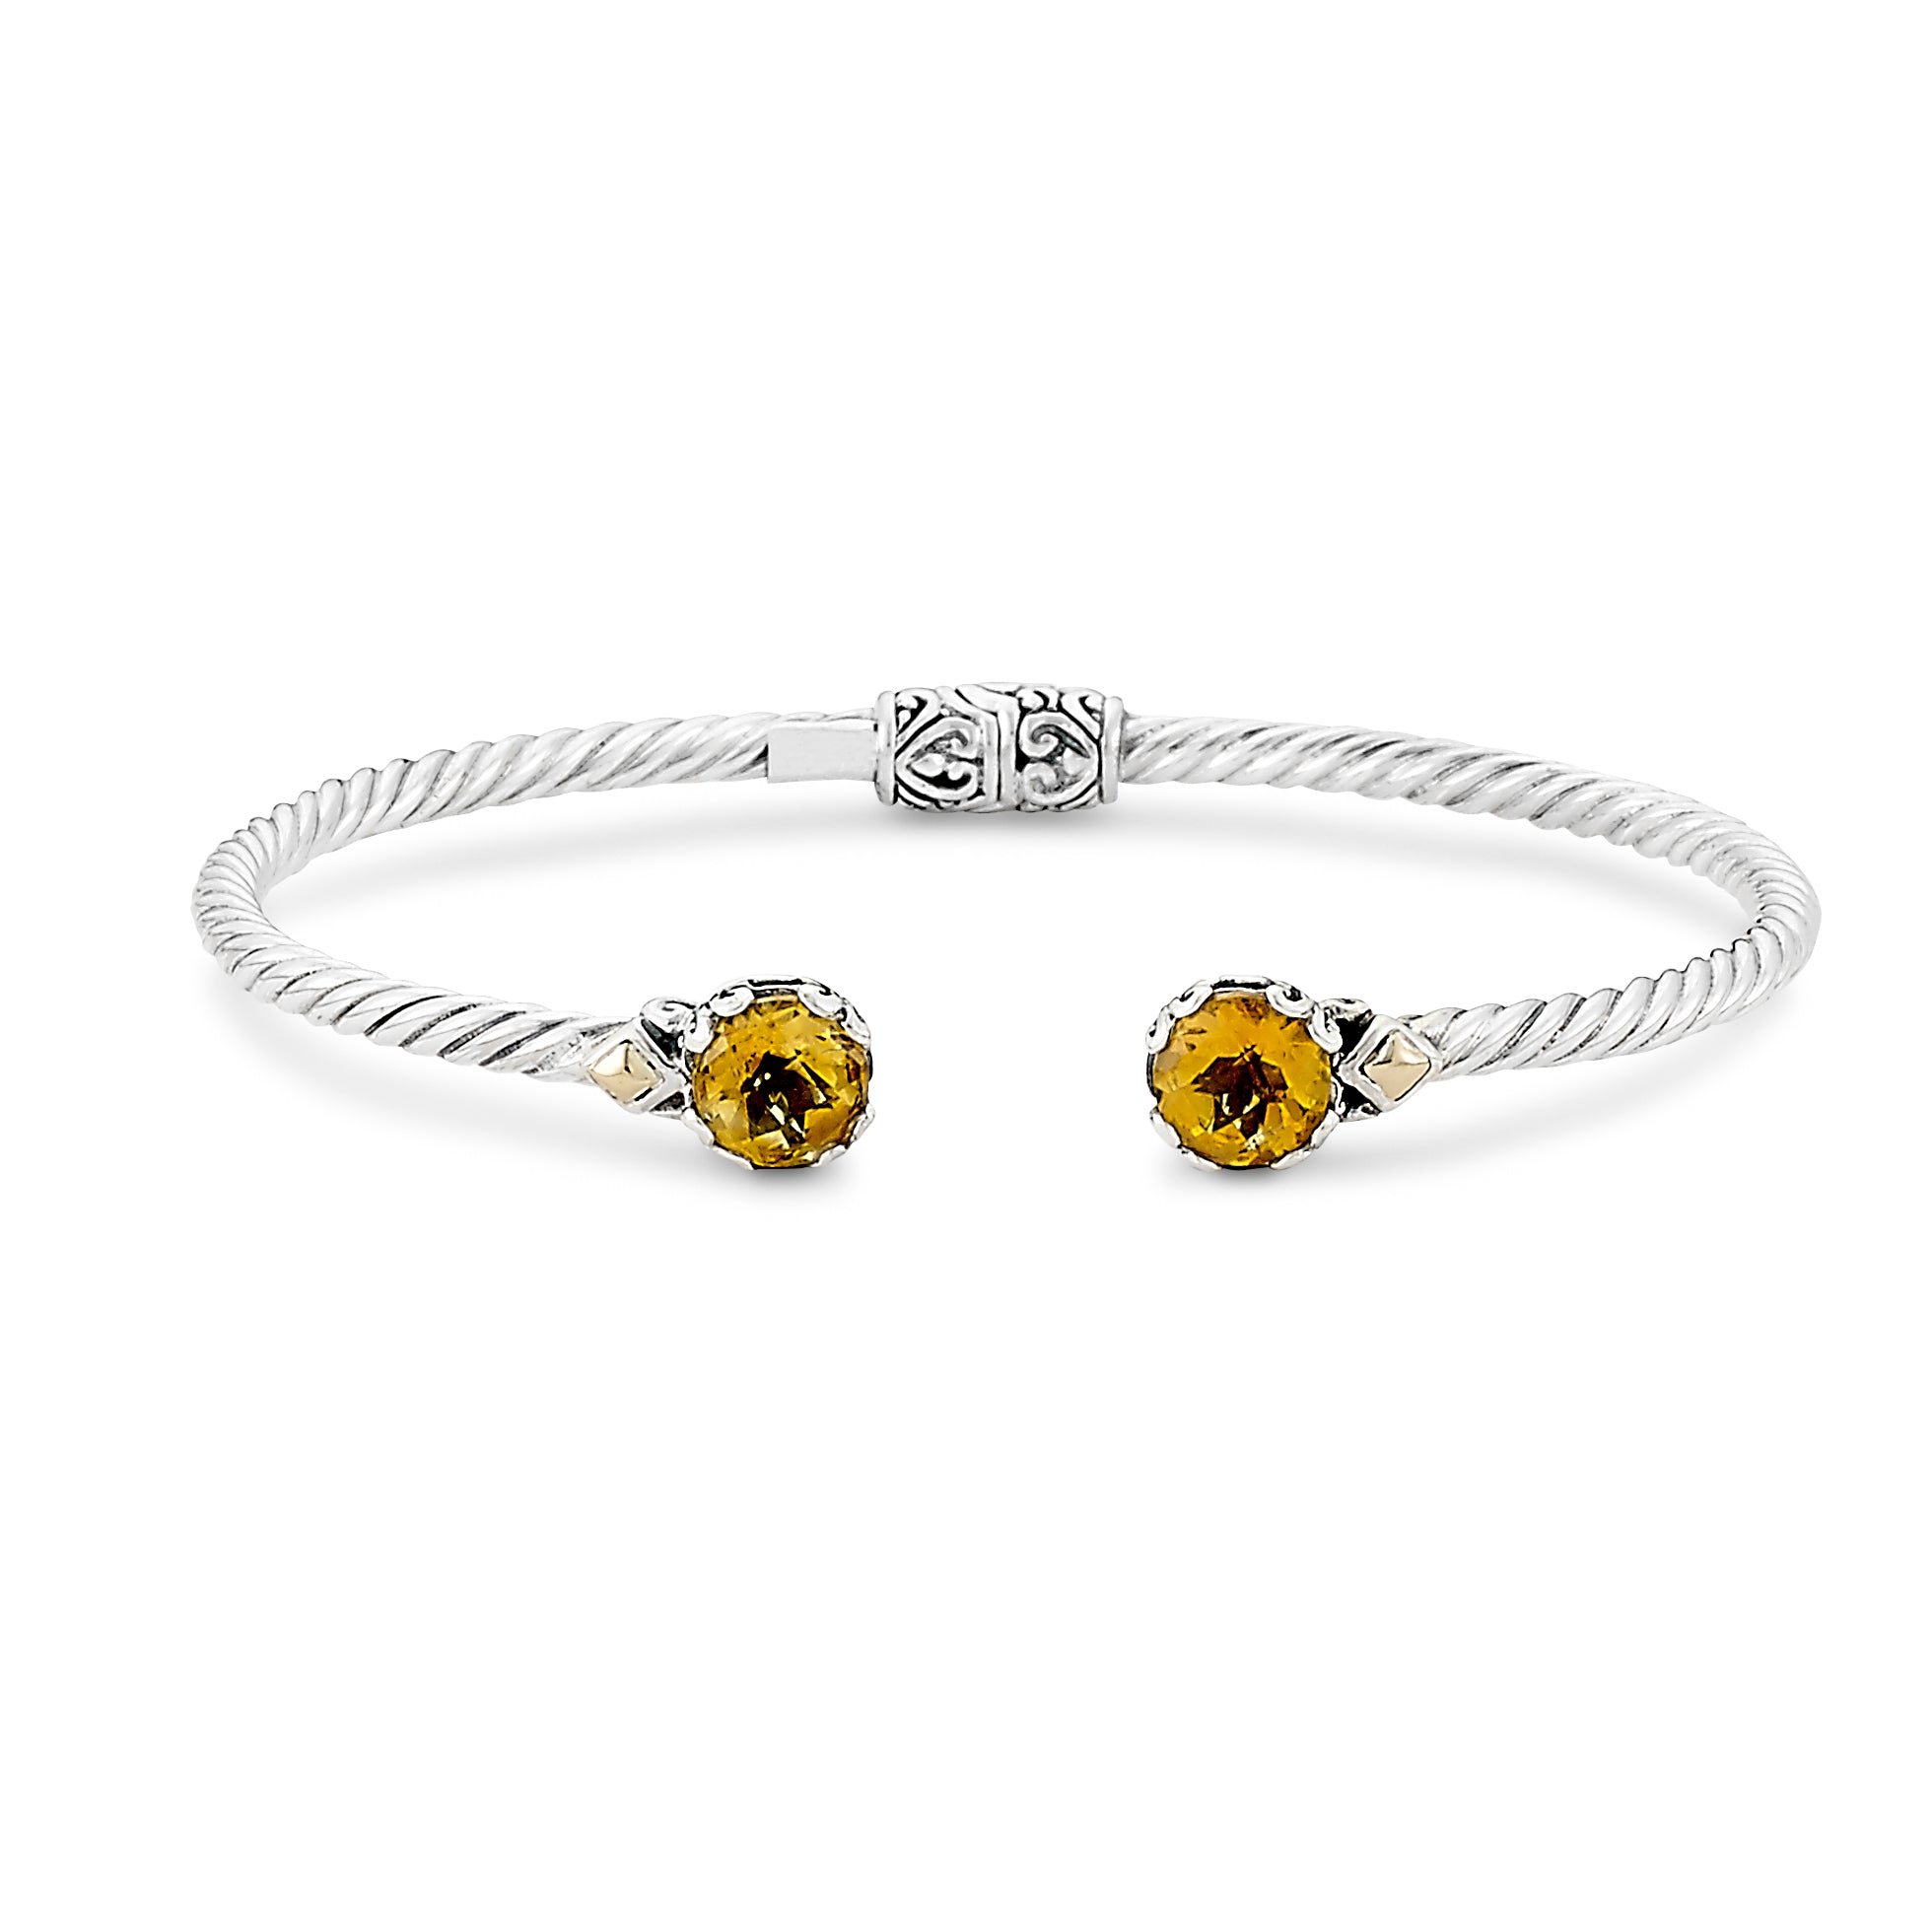 Sterling Silver And 18K Yellow Gold Citrines Bracelet